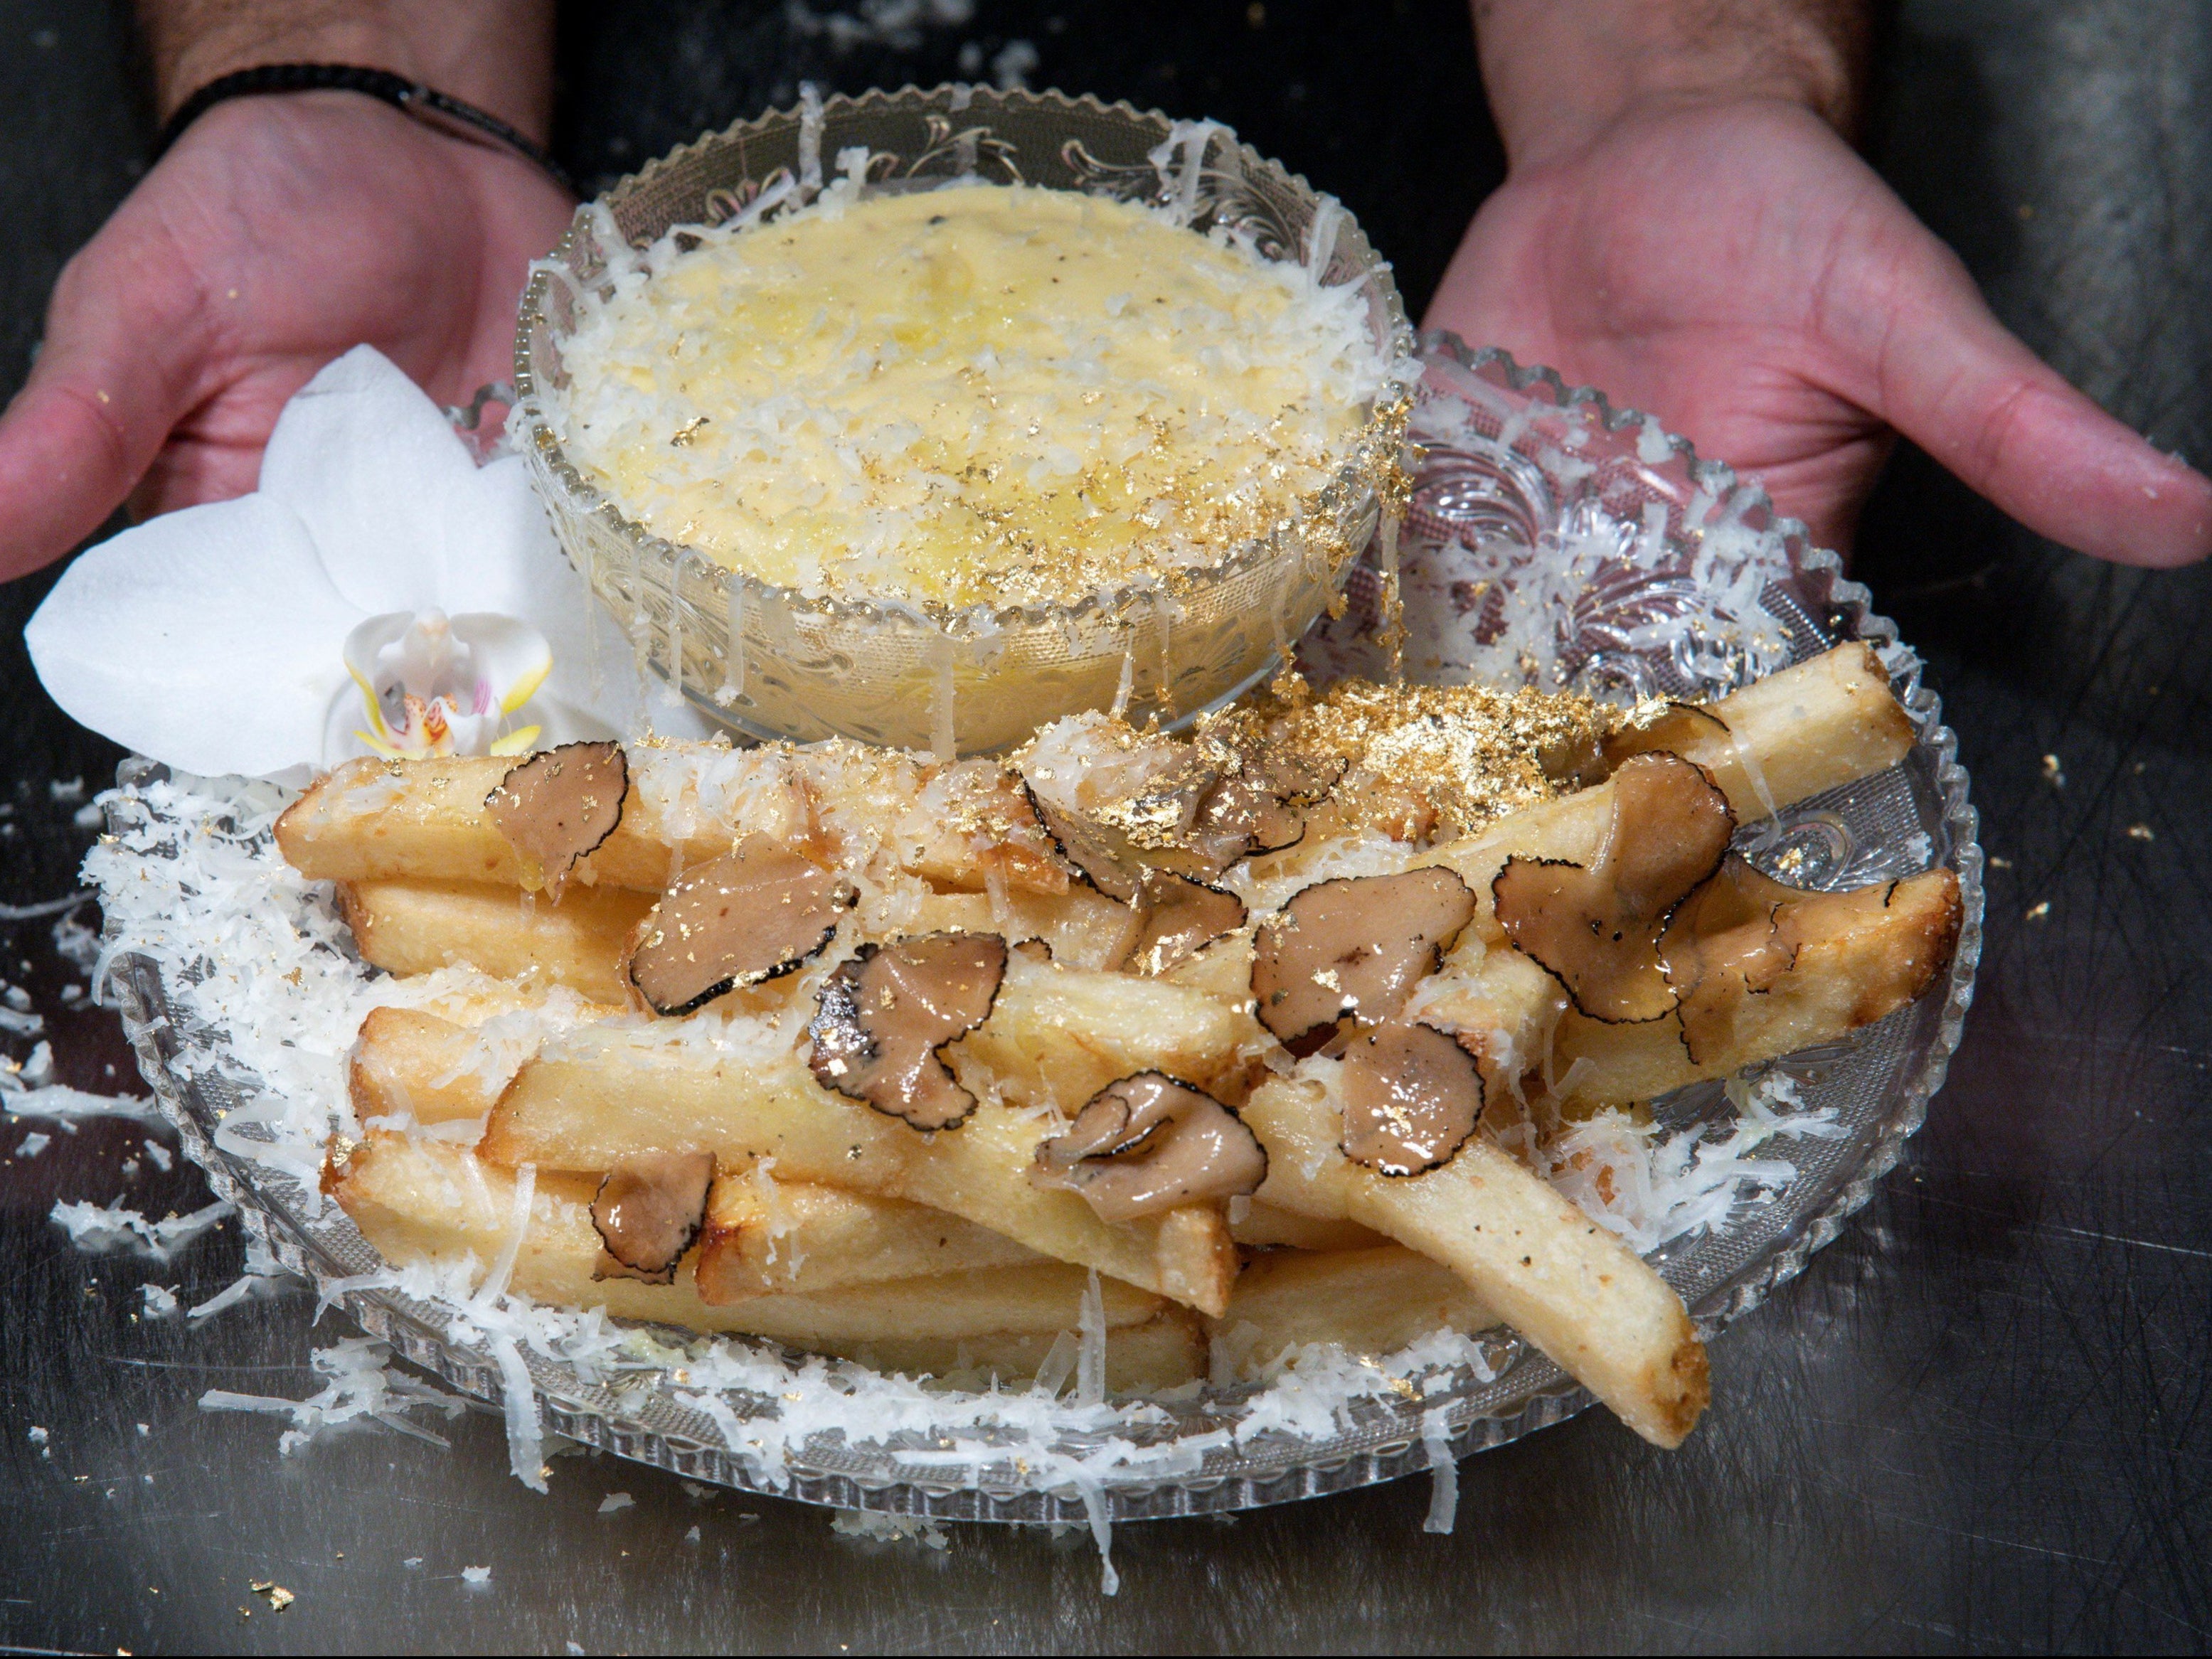 The world’s most expensive fries